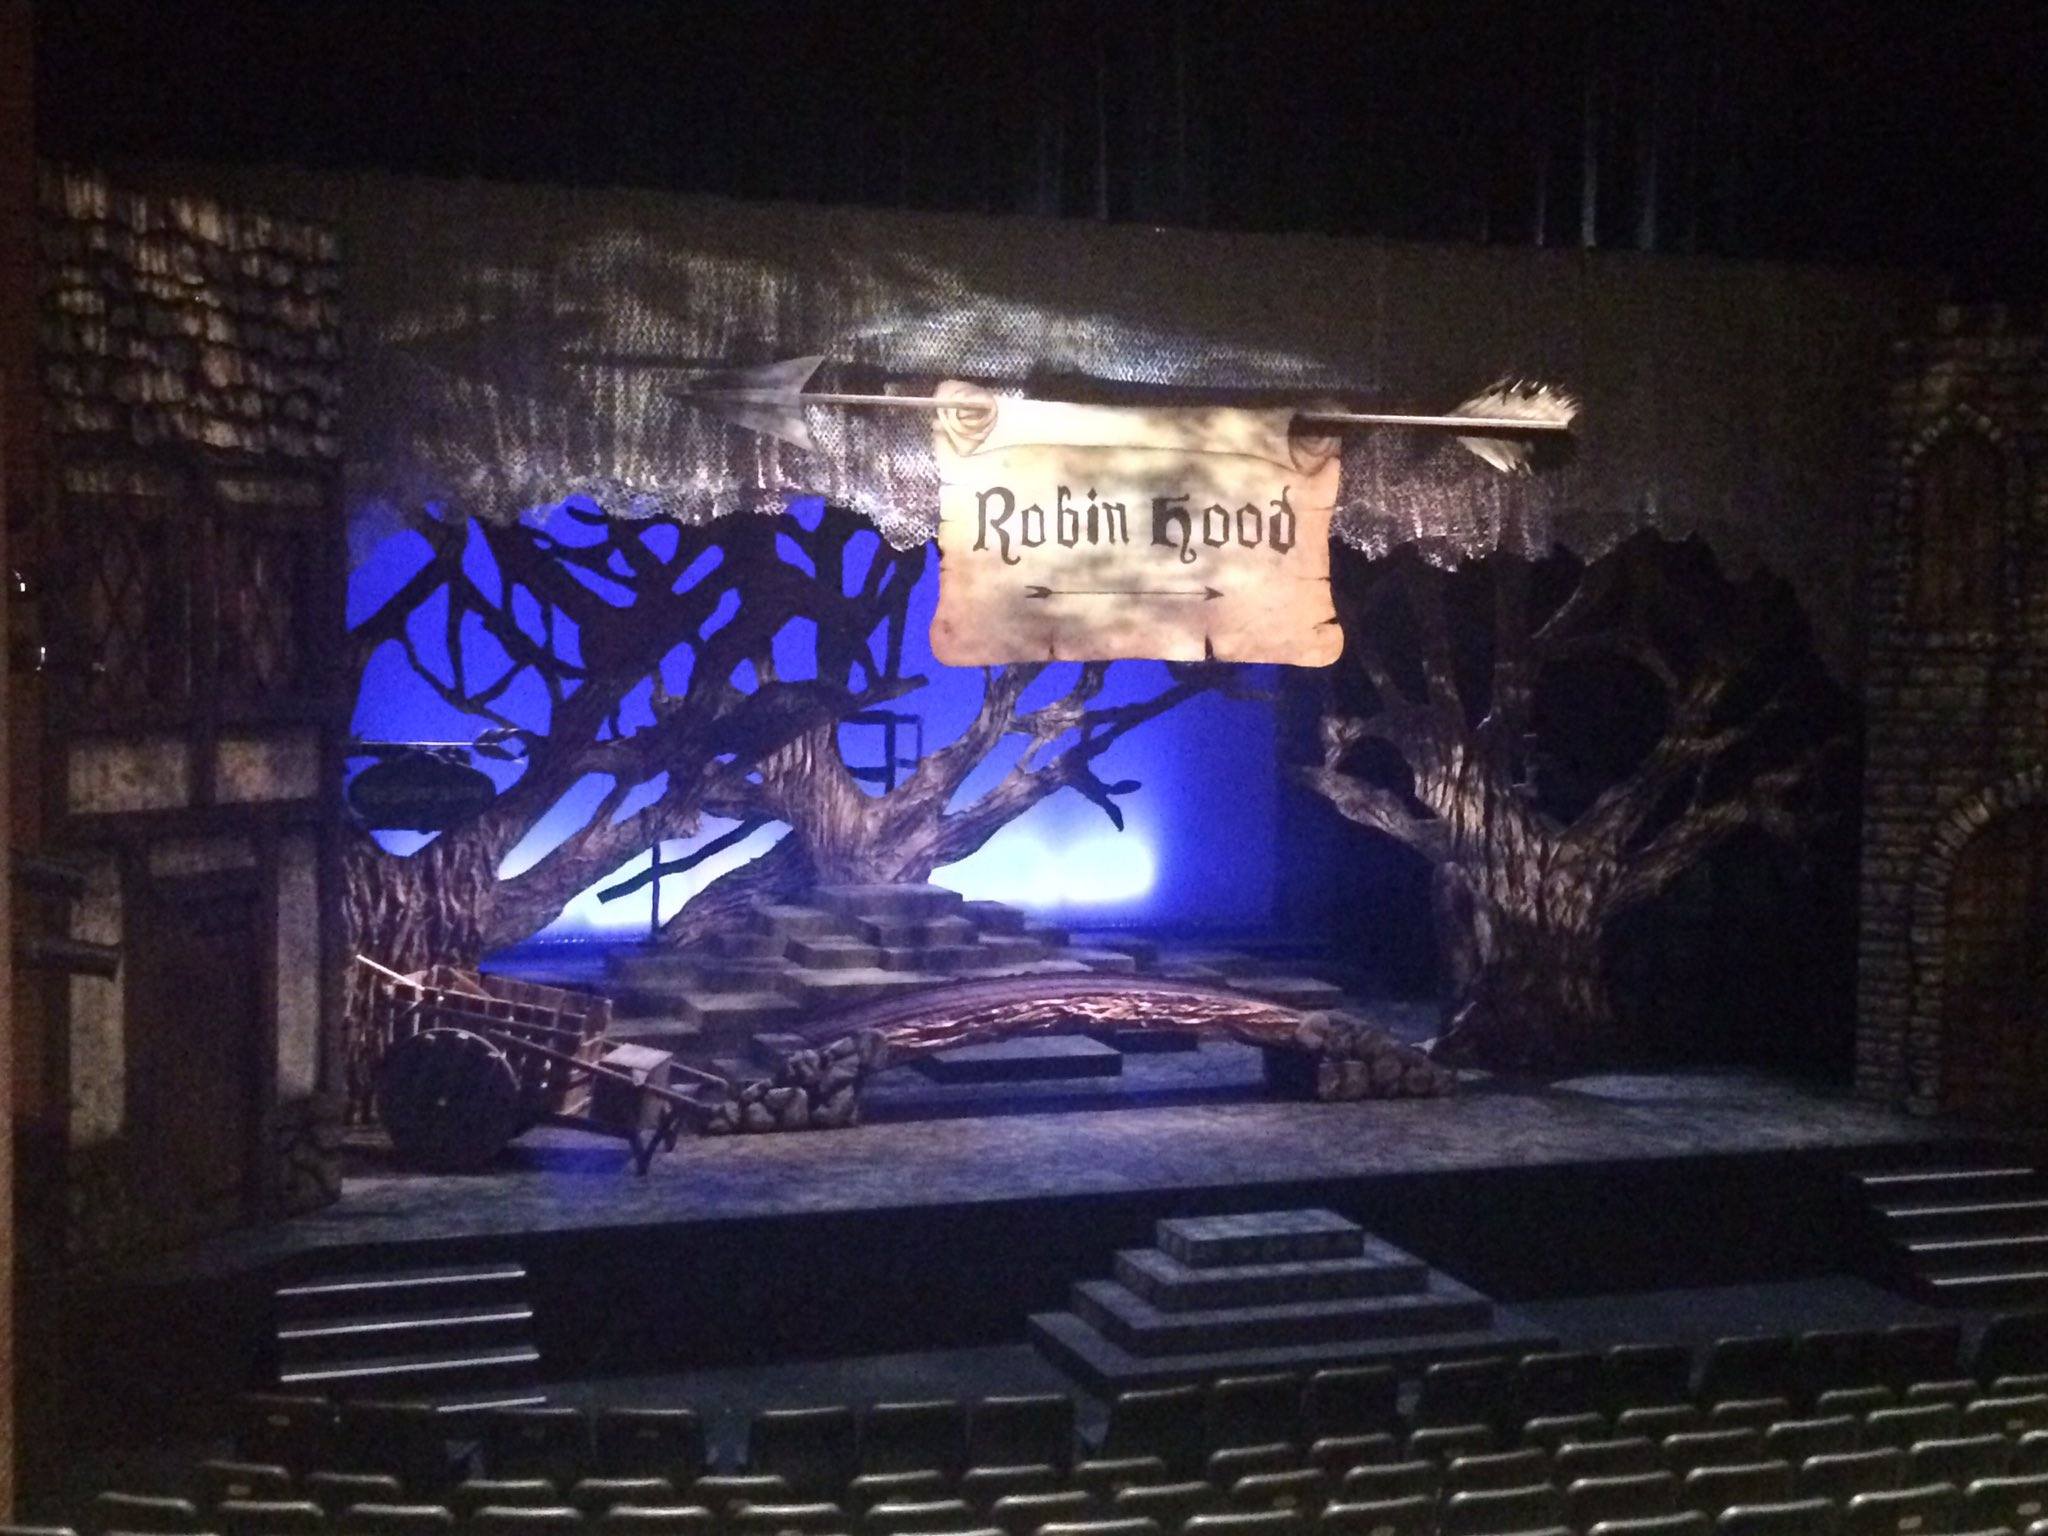 CLASSIC TALE - Red Deer College theatre students present Robin Hood on the Arts Centre mainstage. Performances run through to Dec. 3rd. Matinees are also scheduled for Nov. 26th and Dec. 3rd.